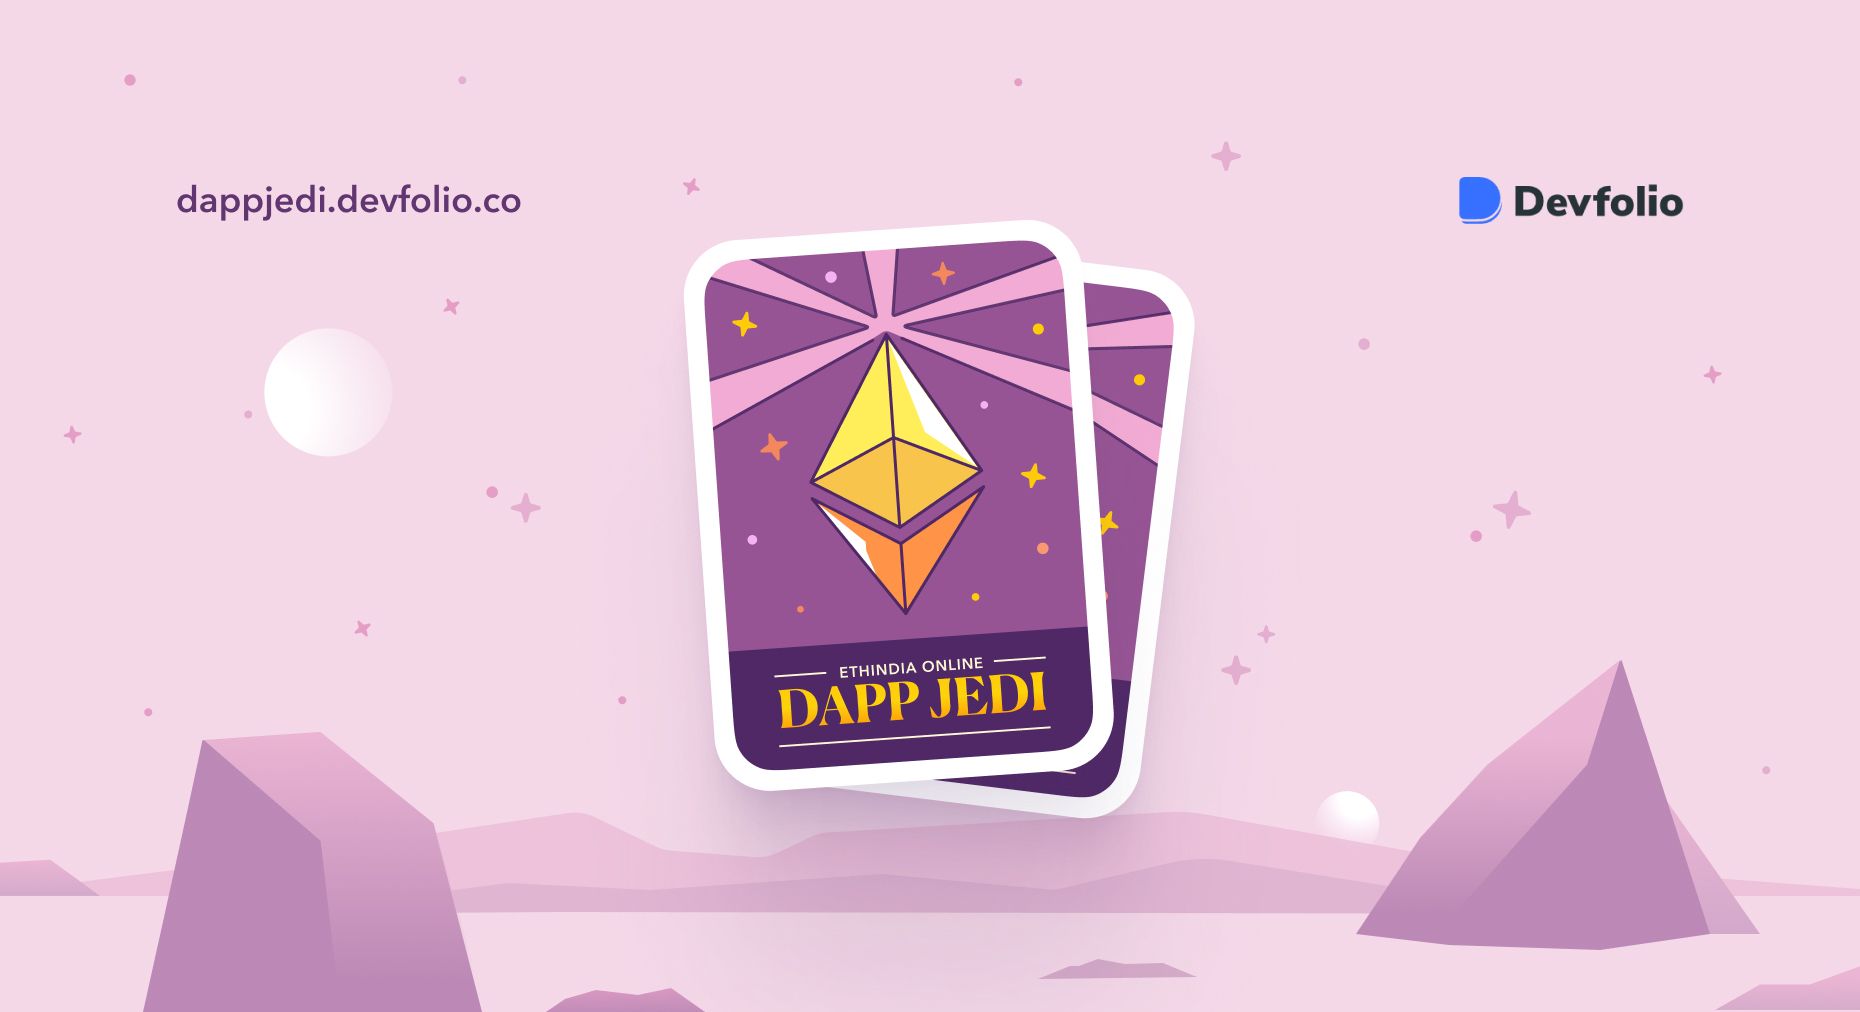 Announcing the winners of the ETHIndia Online: Dapp Jedi hackathon 🚀